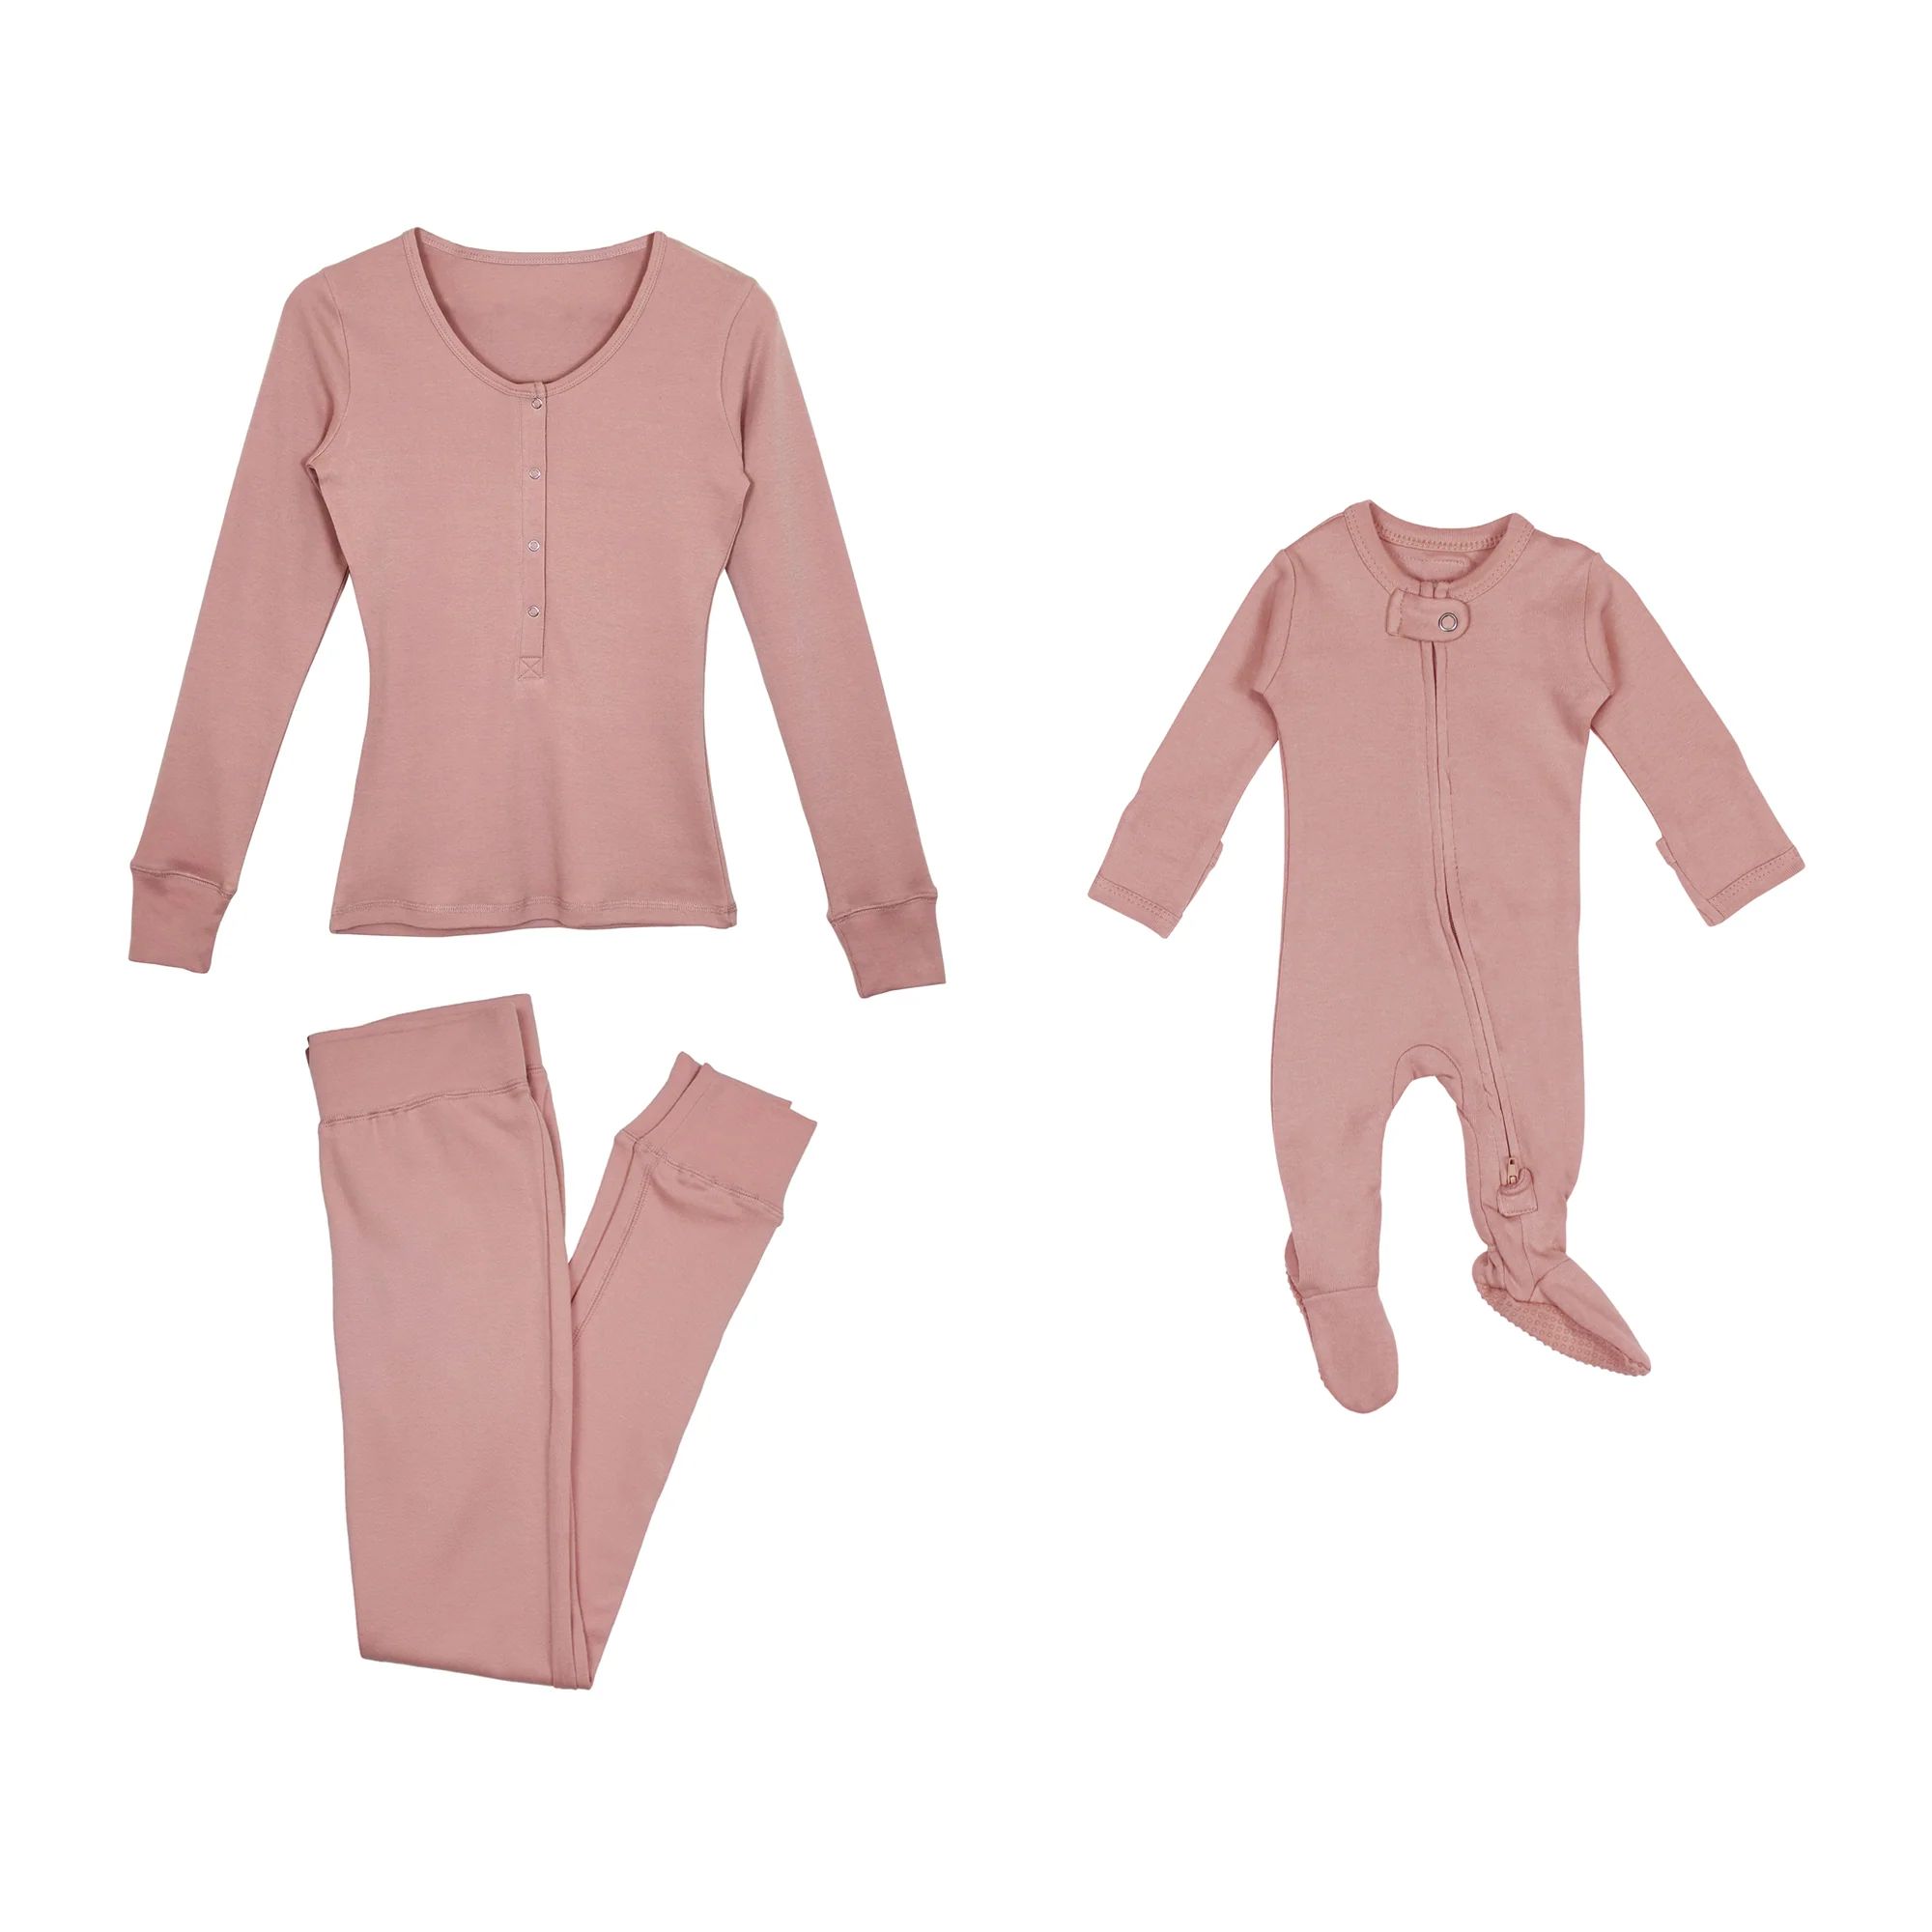 Mommy & Me Bundle in Mauve | L'ovedbaby